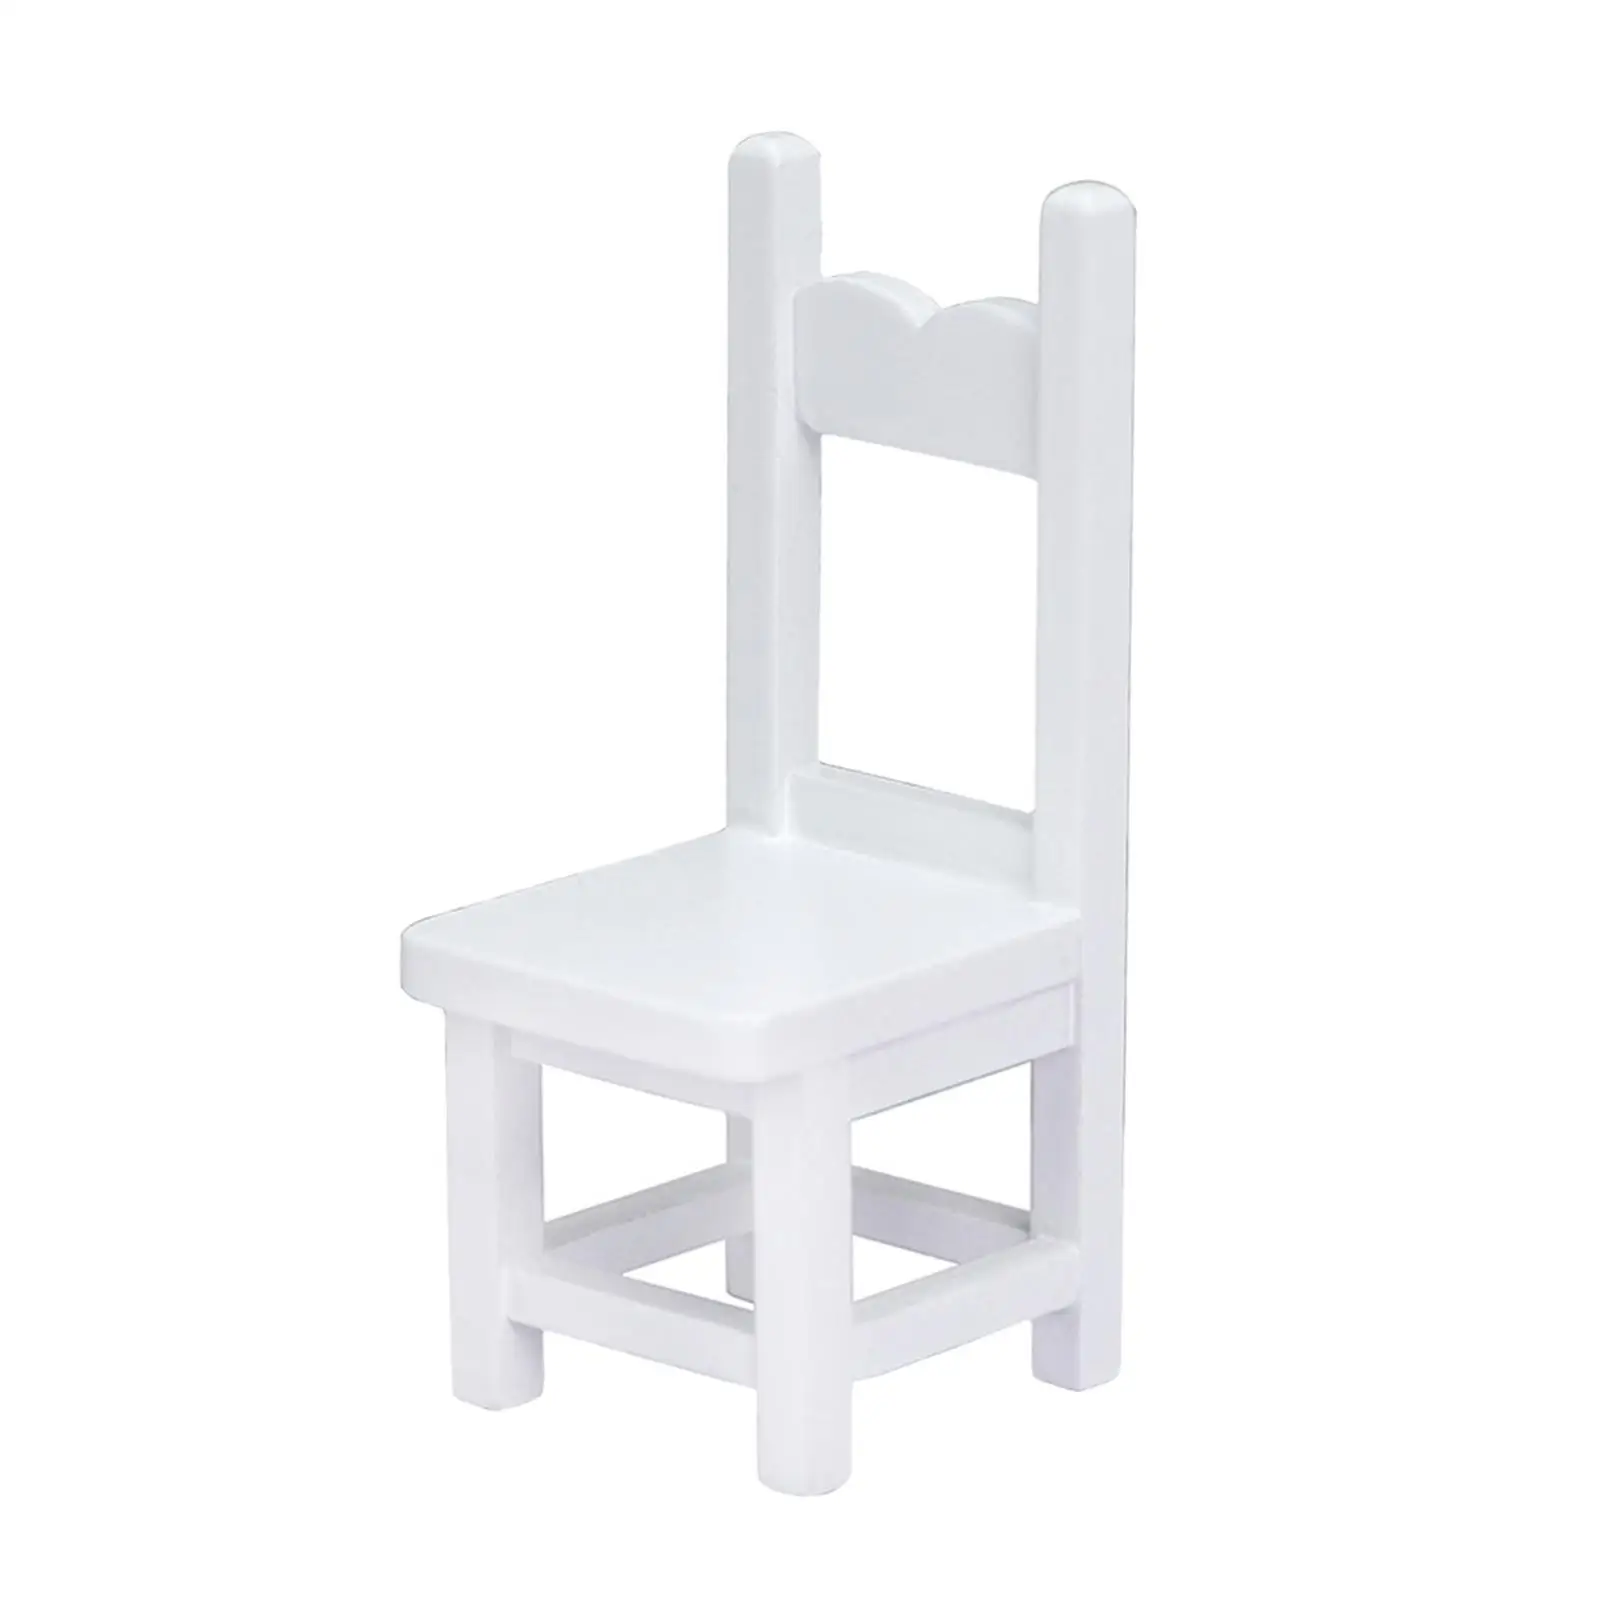 1:12TH Dollhouse Furniture Simulation Chair for Kitchen Decor Kids Gifts DIY